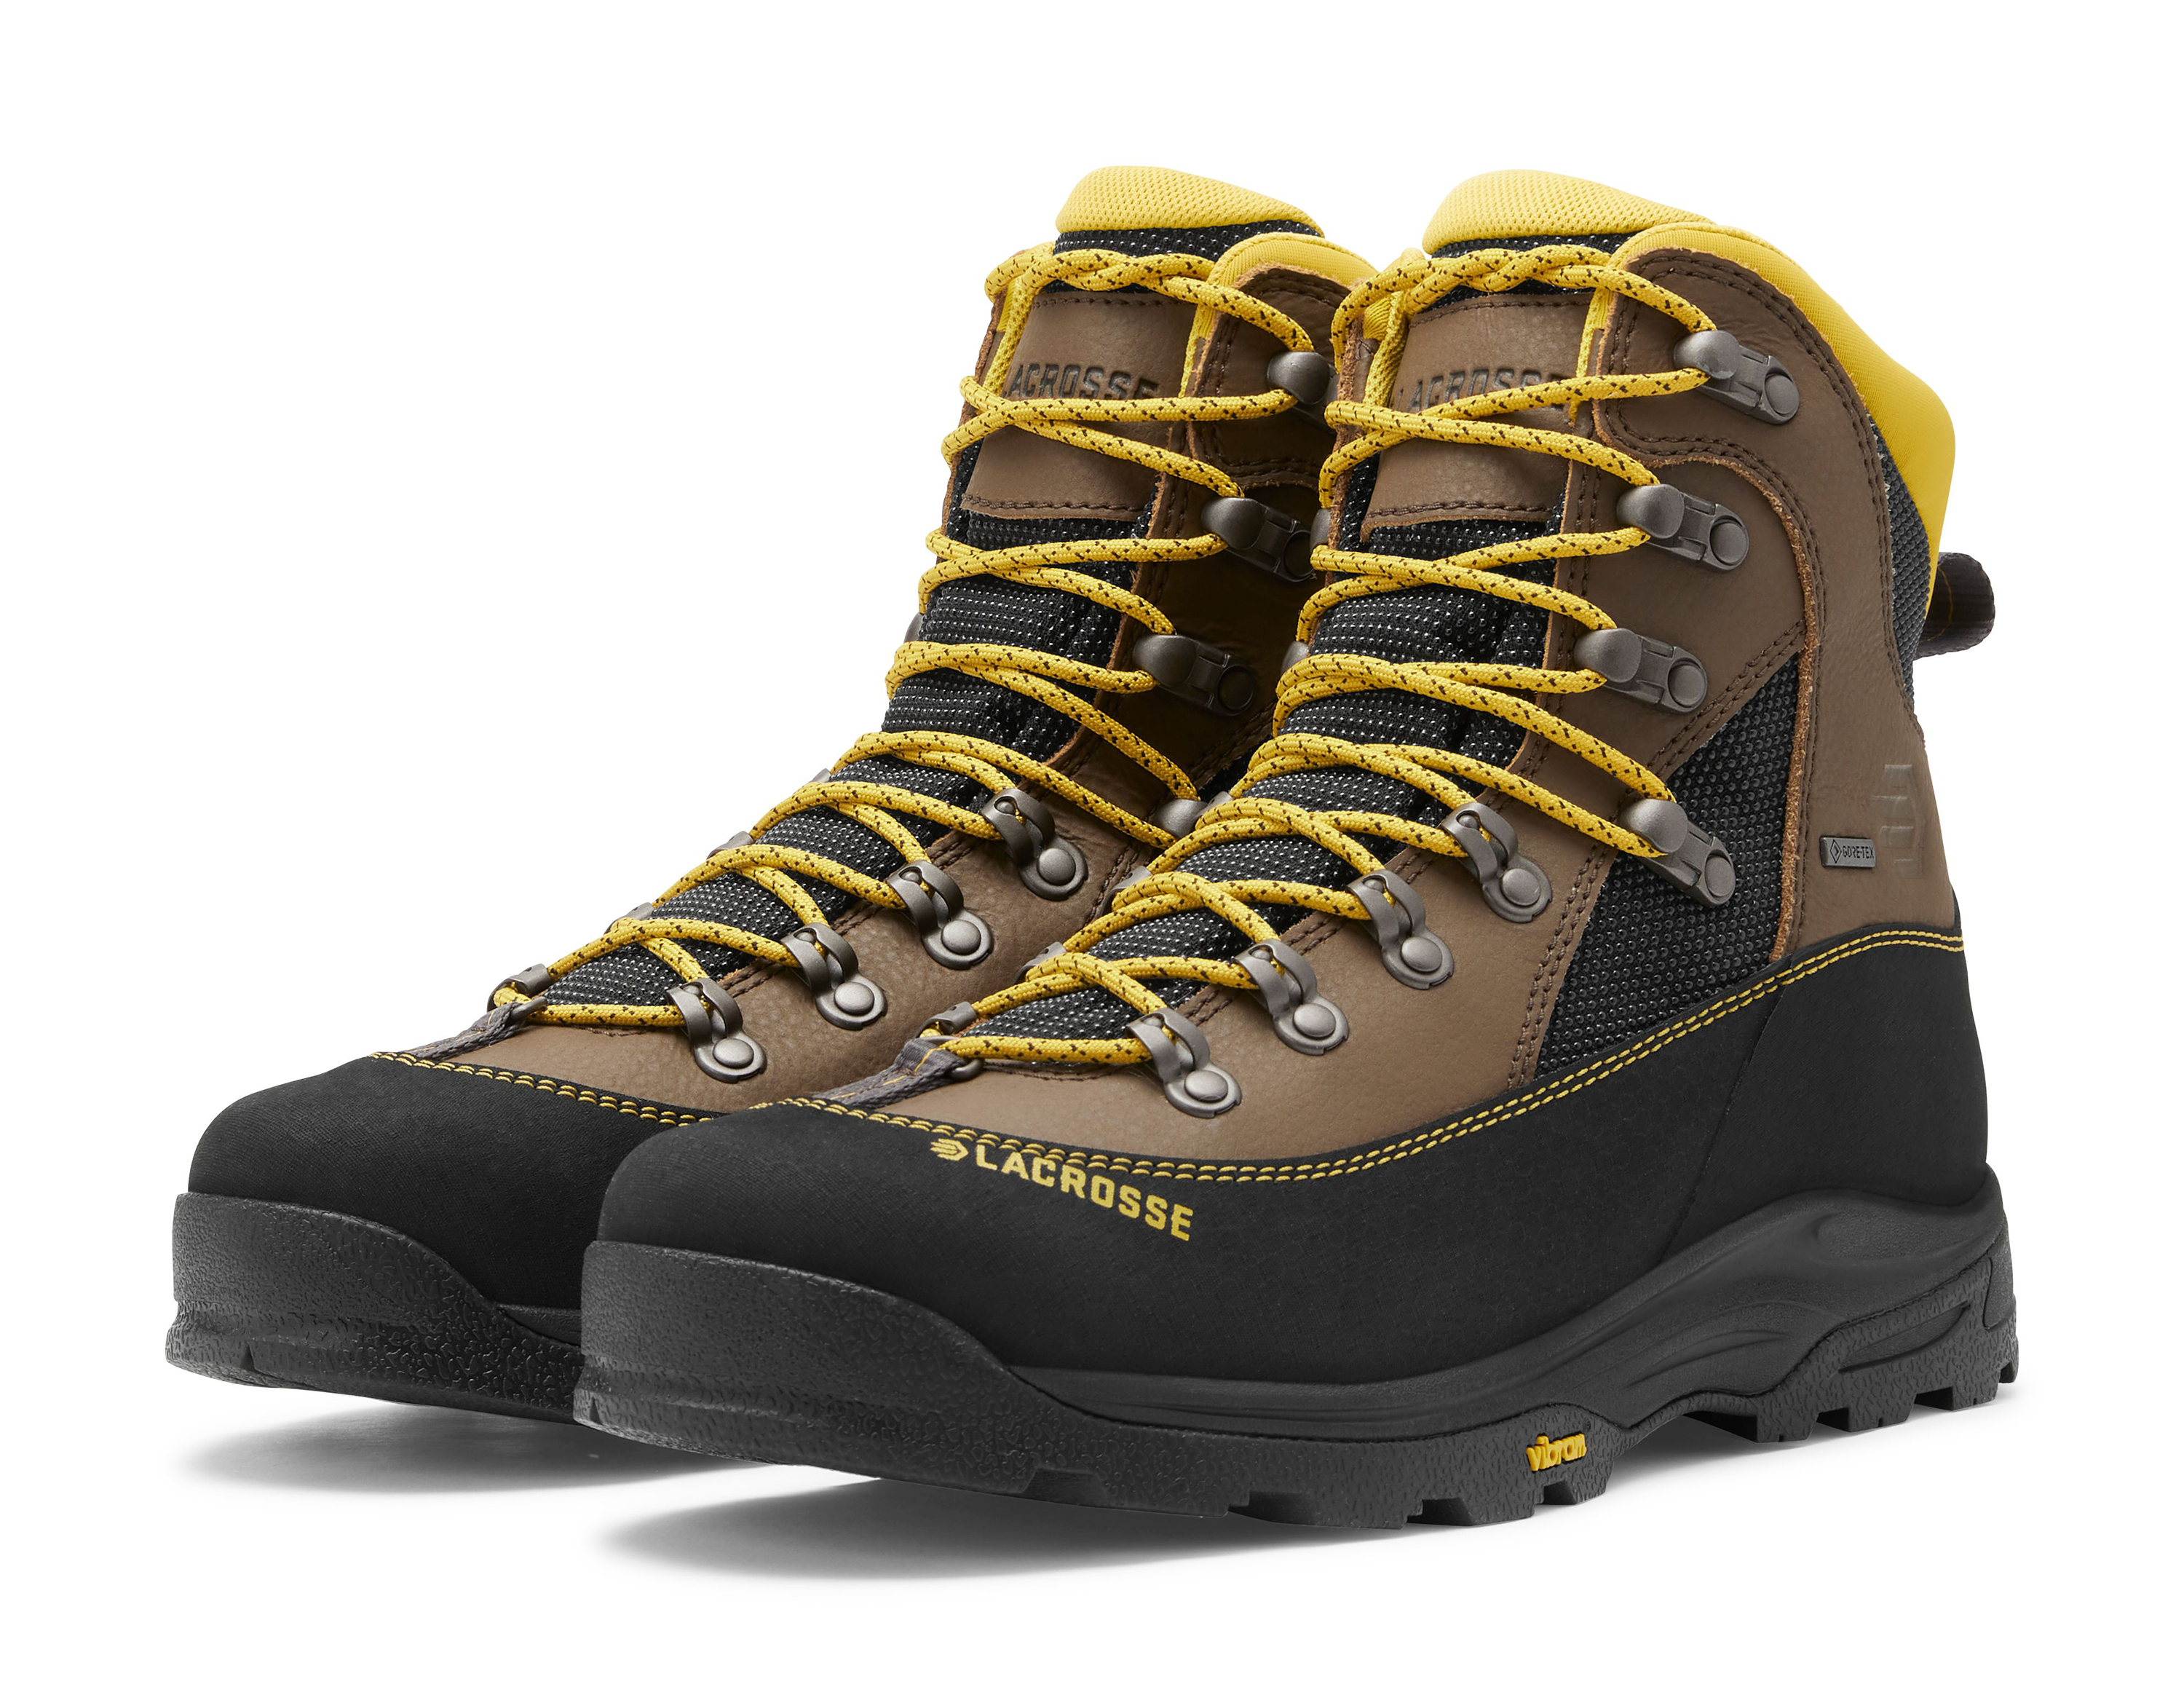 LaCrosse Ursa MS GORE-TEX Hunting Boots for Men - Brown/Gold - 11.5W